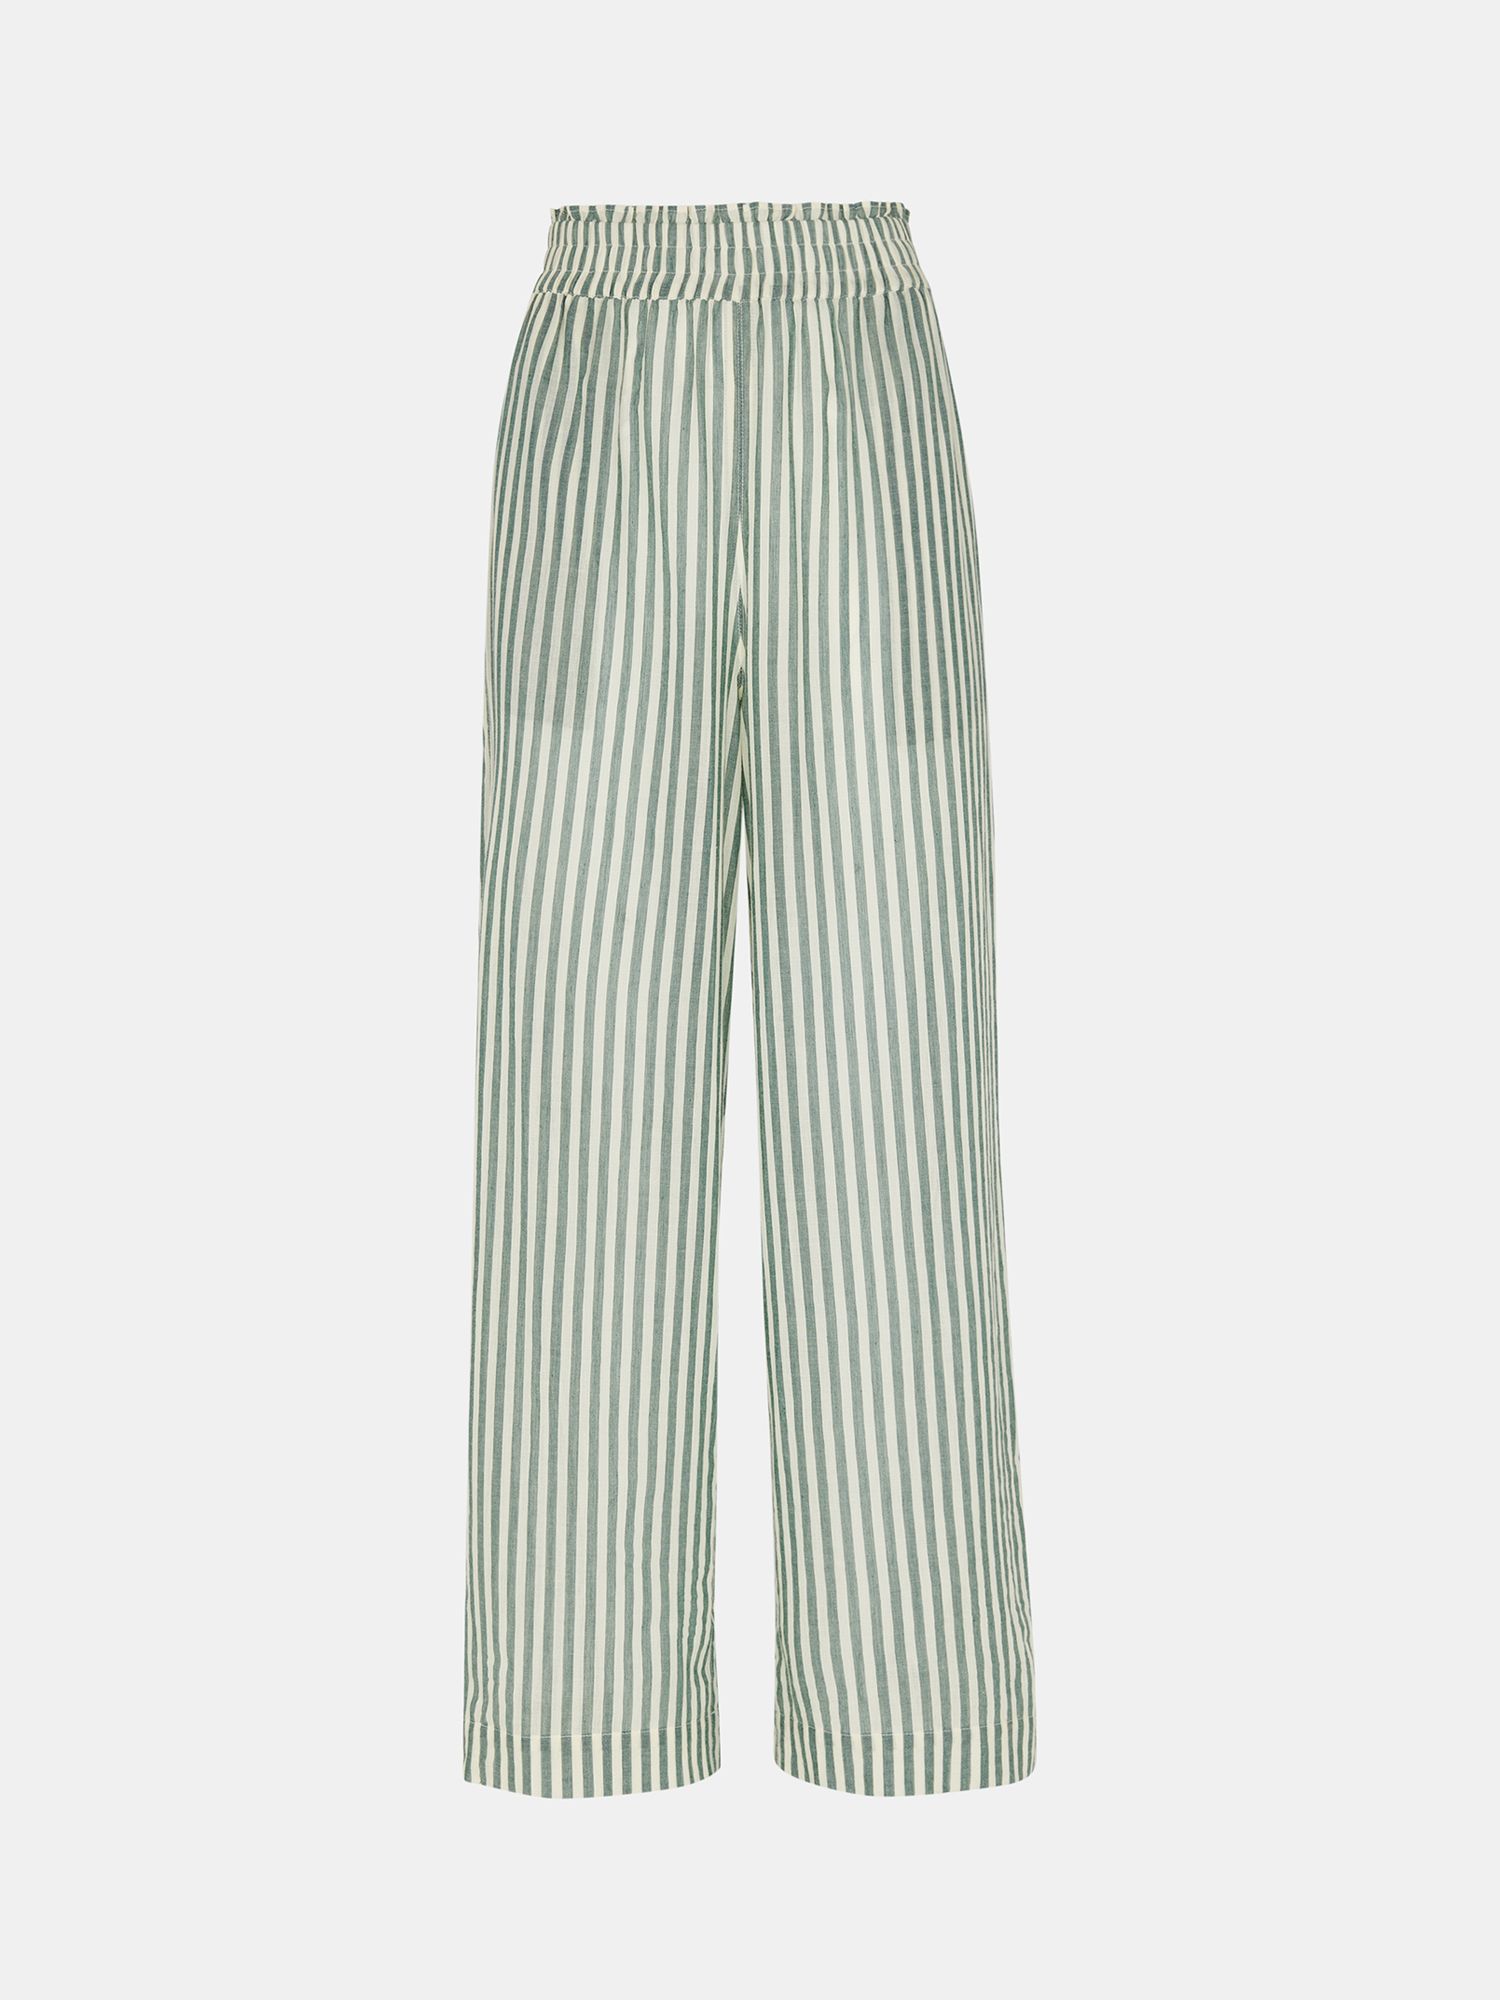 Buy Whistles Stripe Beach Cotton Trousers, Green/White Online at johnlewis.com